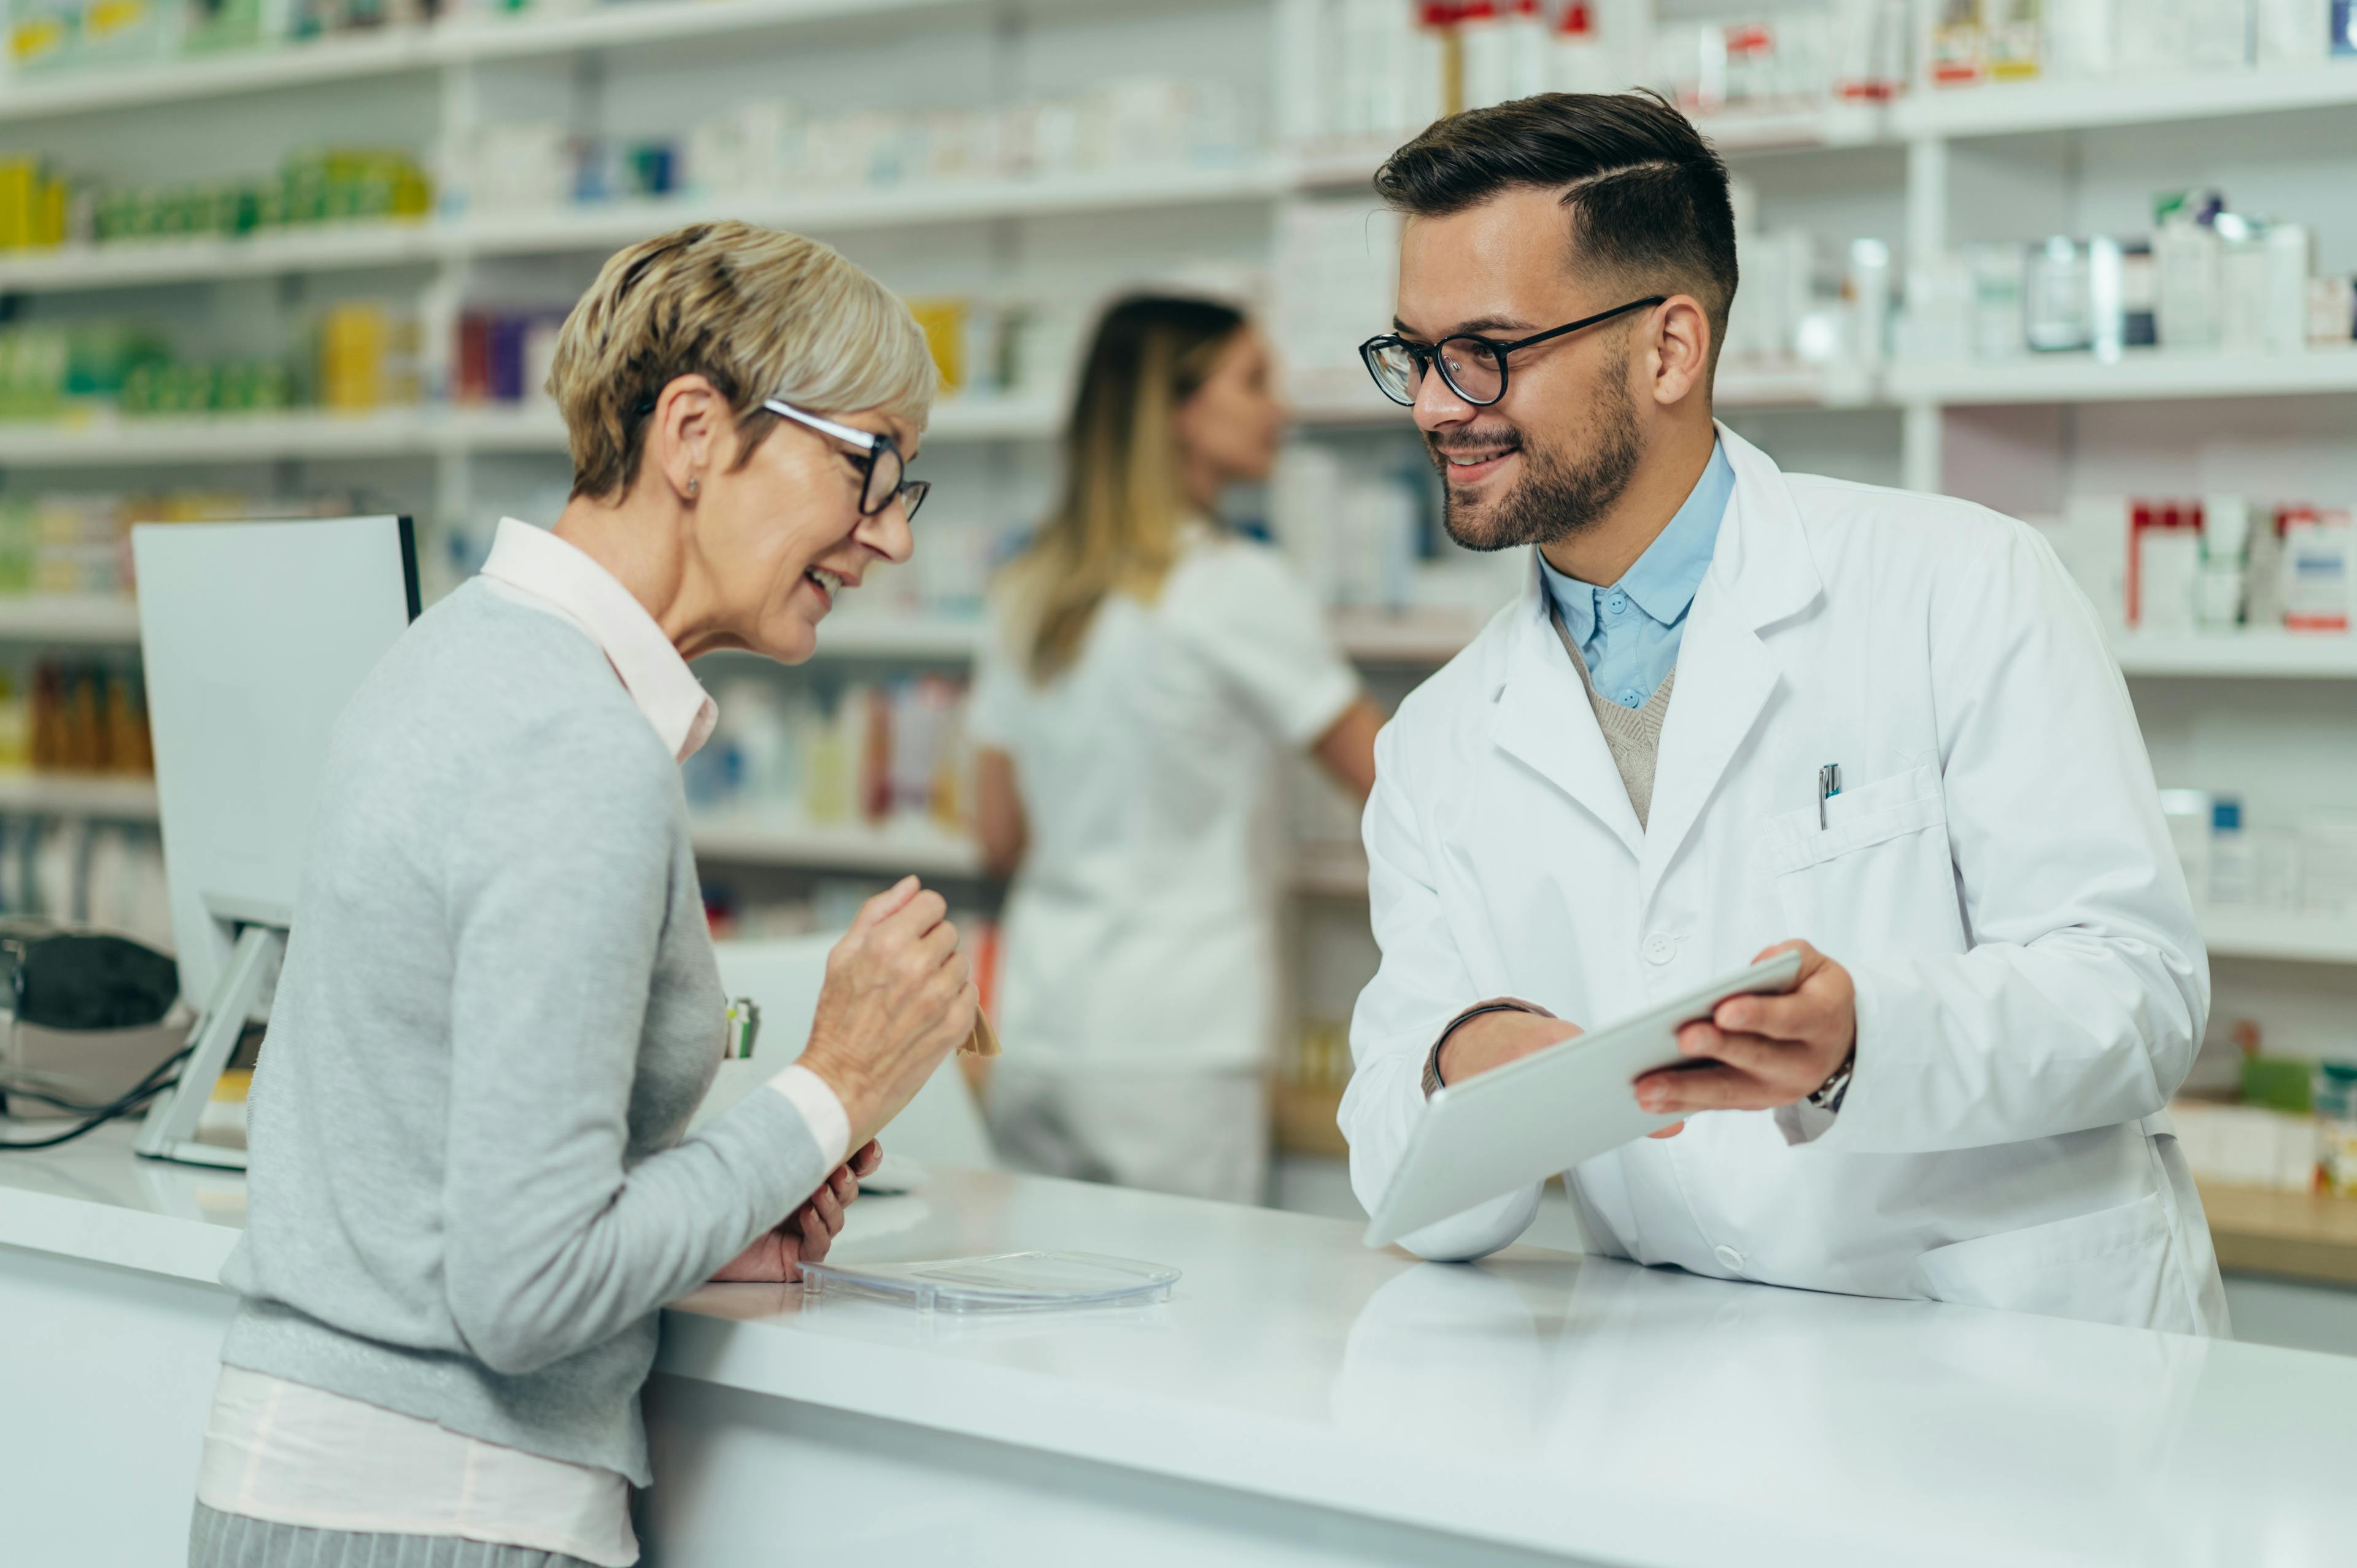 Lady consulting a pharmacist